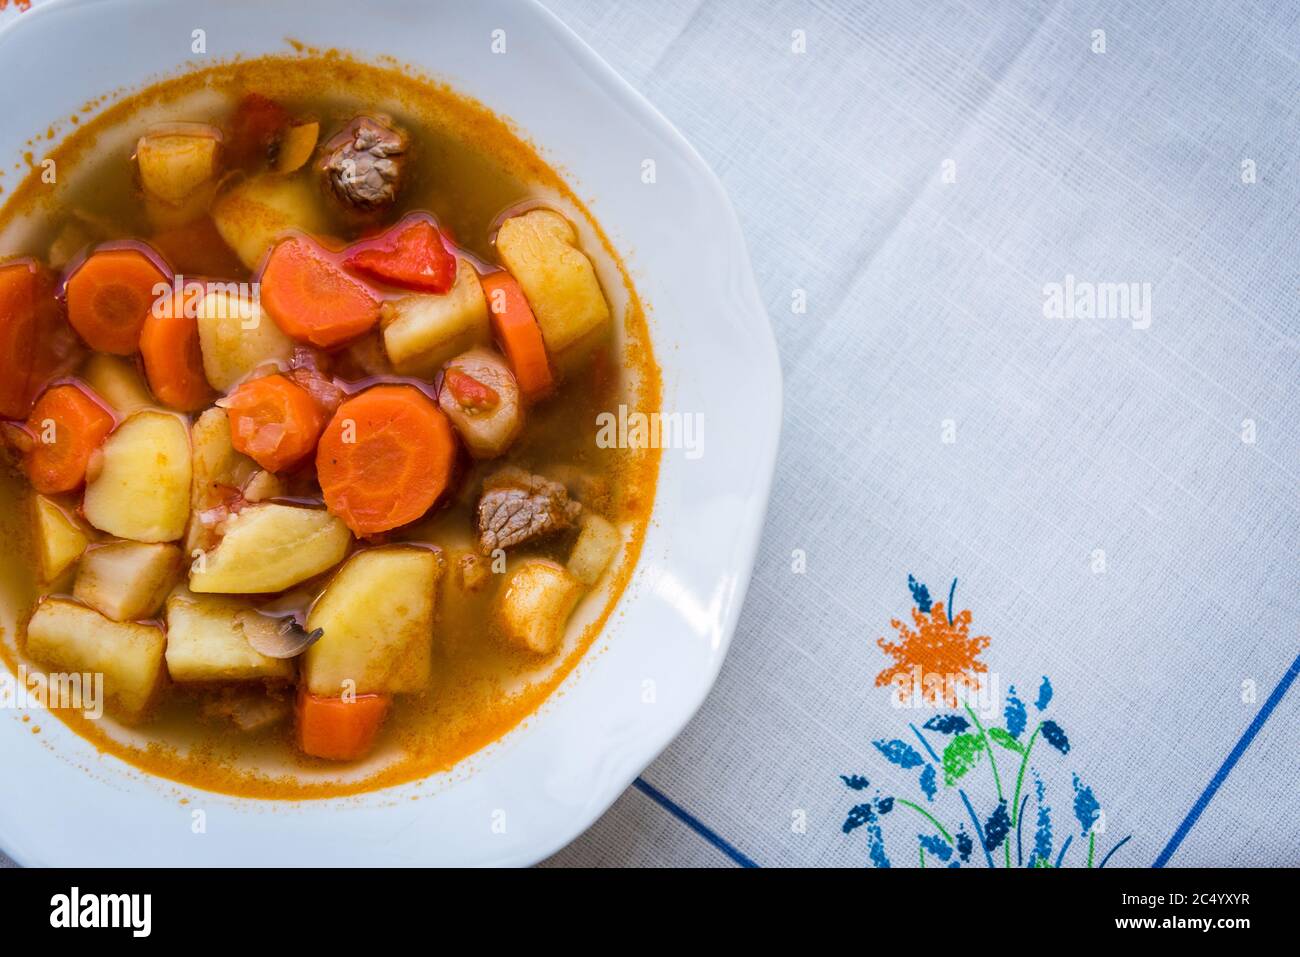 Traditional homemade Hungarian hot goulash soup with mear, potato, carrot and mushrooms in a white plate on the table. European cuisine. Top view. Stock Photo